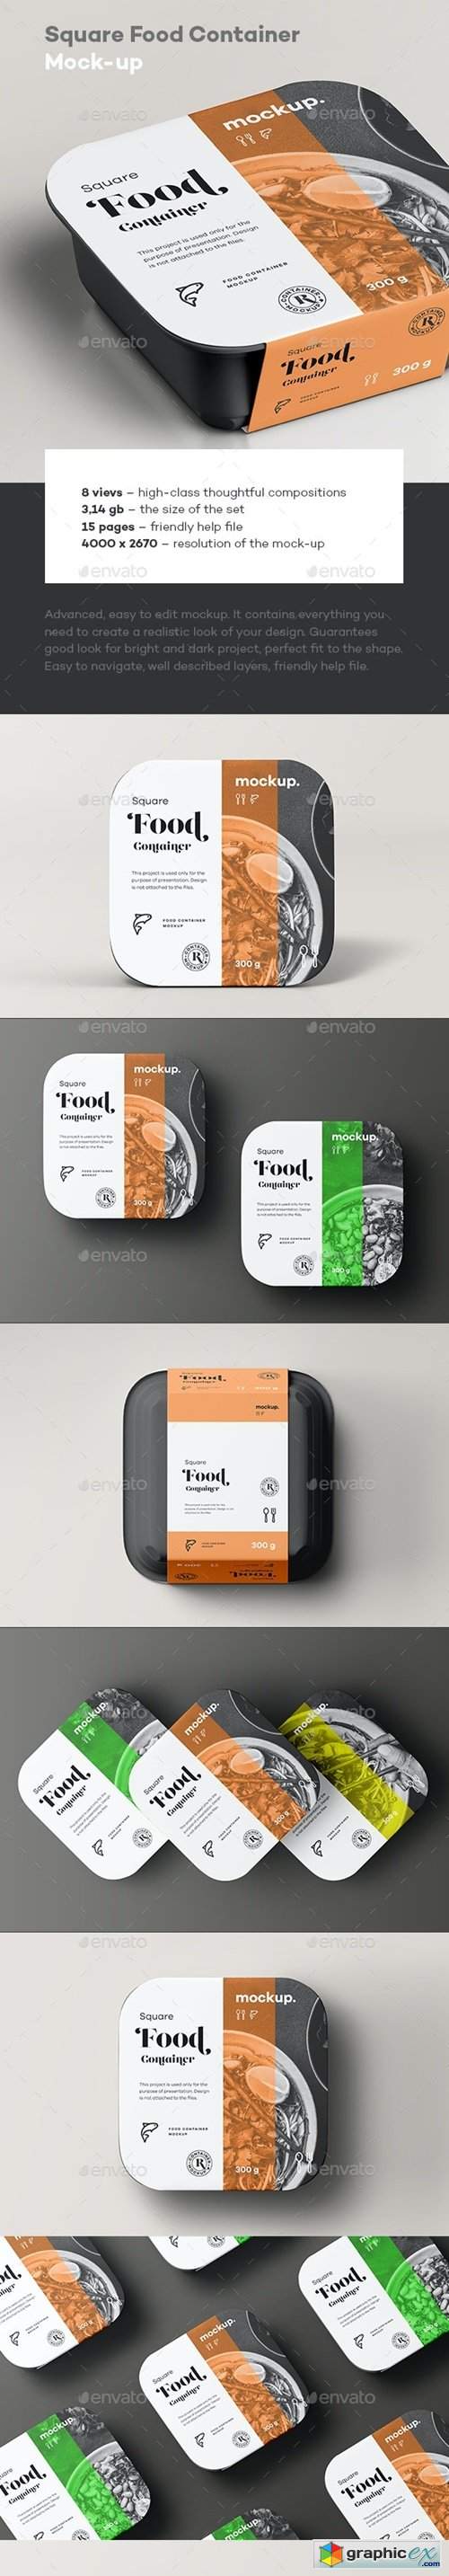 Square Food Container Mock-up 